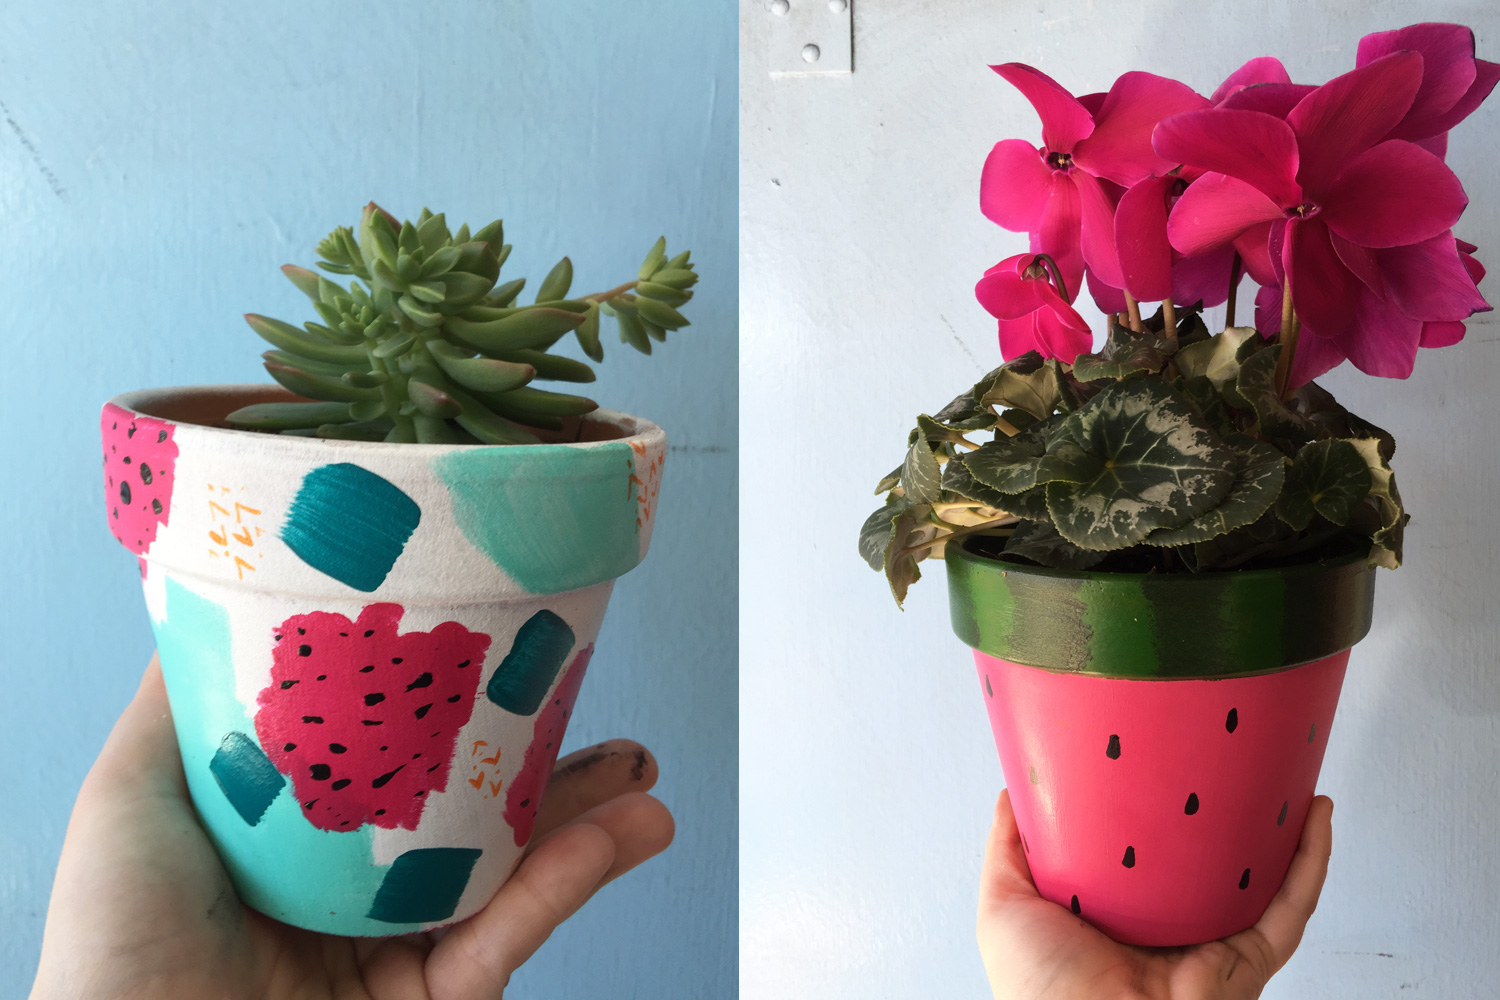 Creative Flower Pot Activity For Kids Better Homes And Gardens,Simple Living Room Color Design